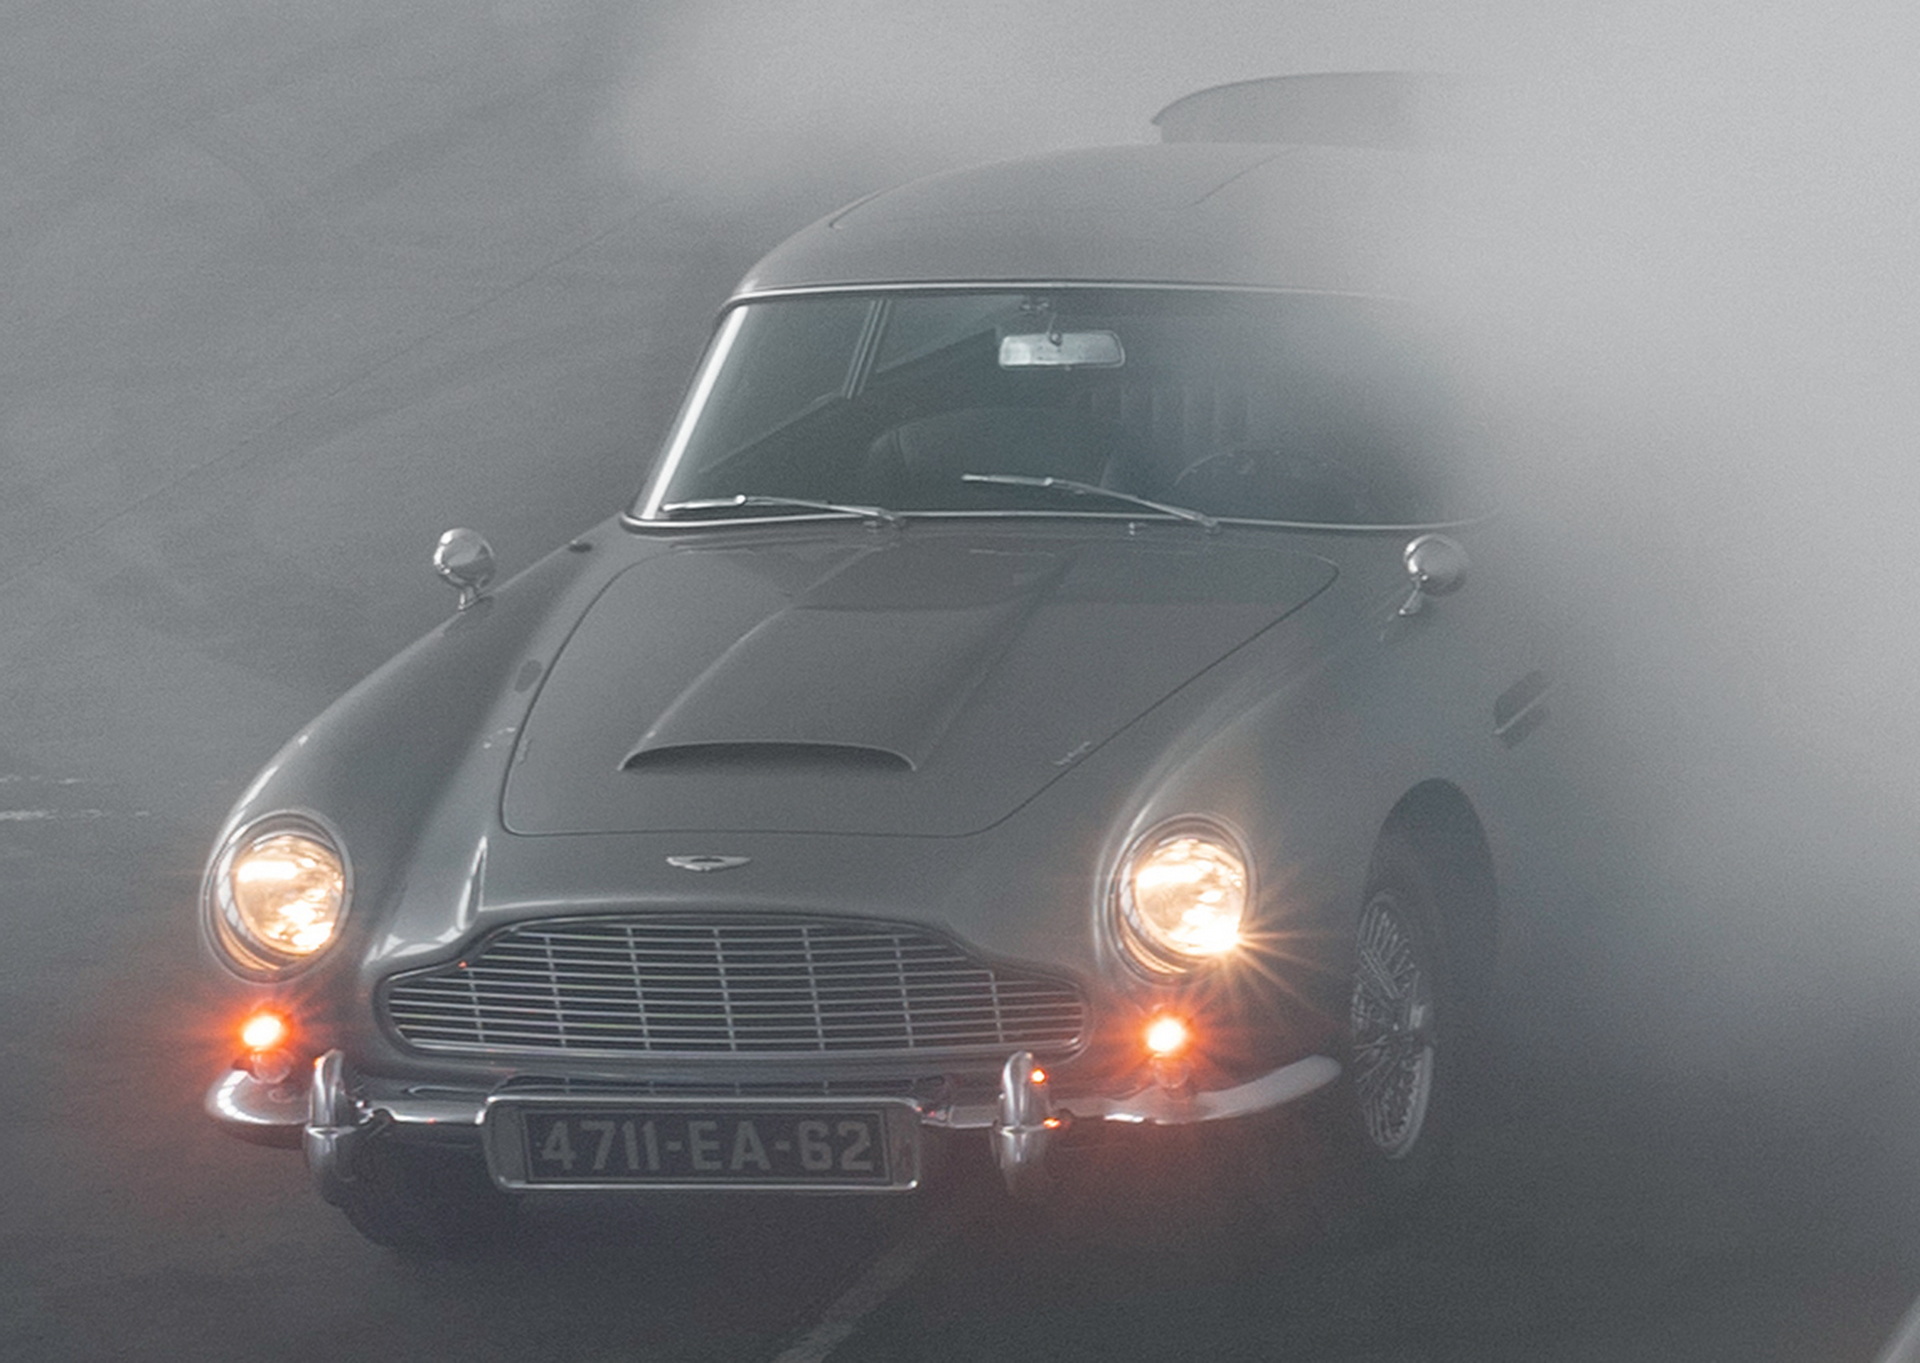 James Bond's Original Aston Martin DB5 From Goldfinger Allegedly Found  After Almost 25 Years